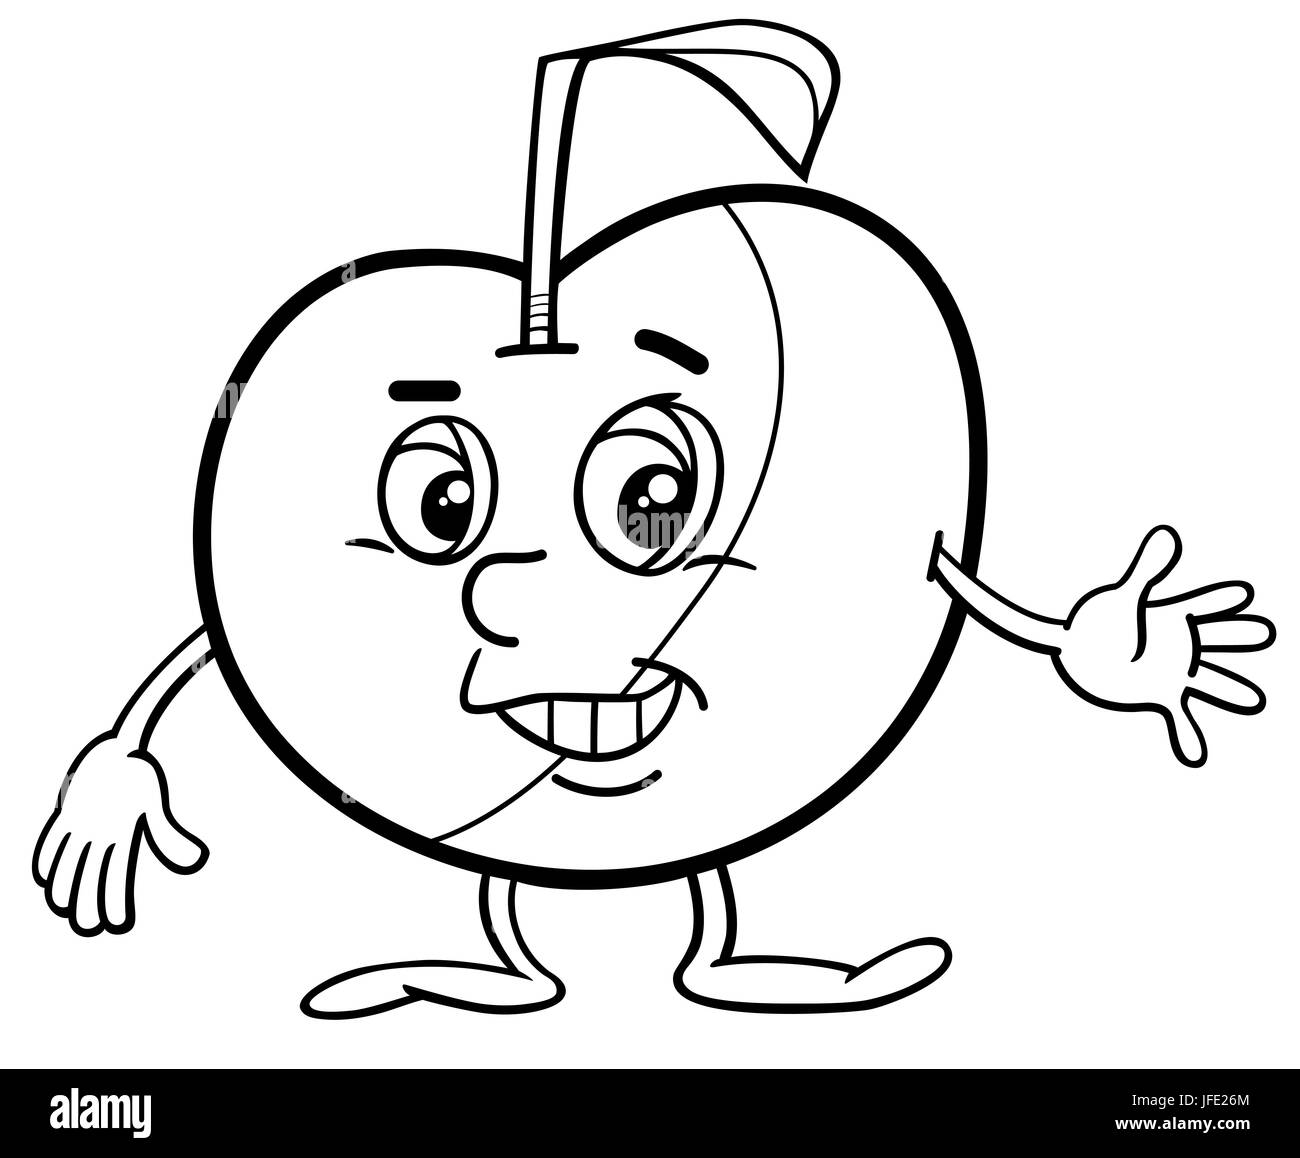 apple character coloring page Stock Photo